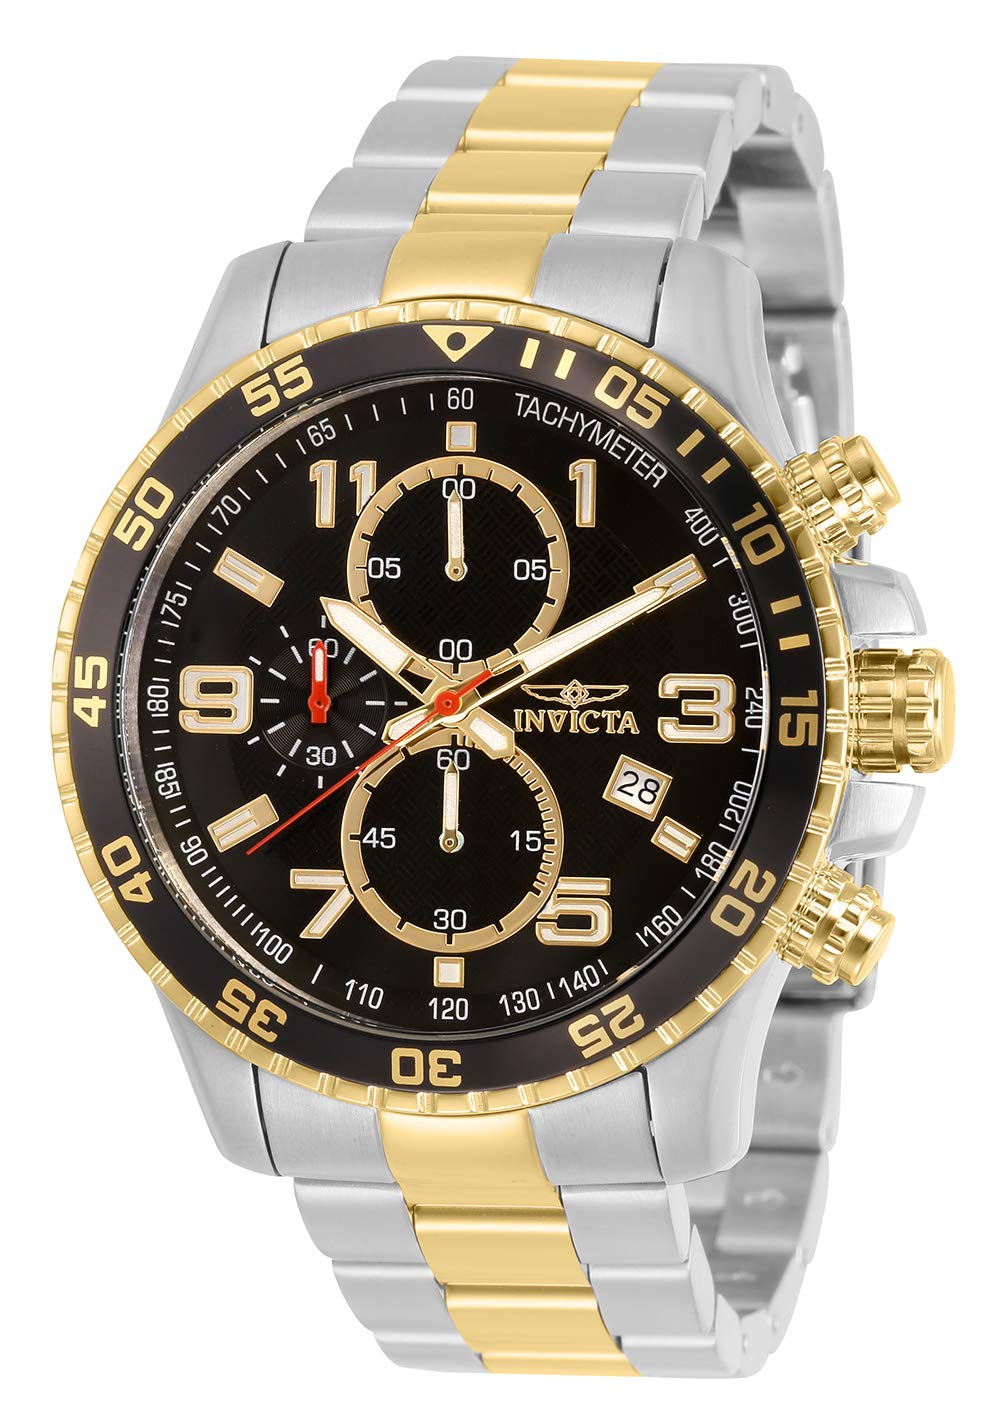 Invicta Men's Specialty Chronograph Textured Dial Stainless Steel Watch